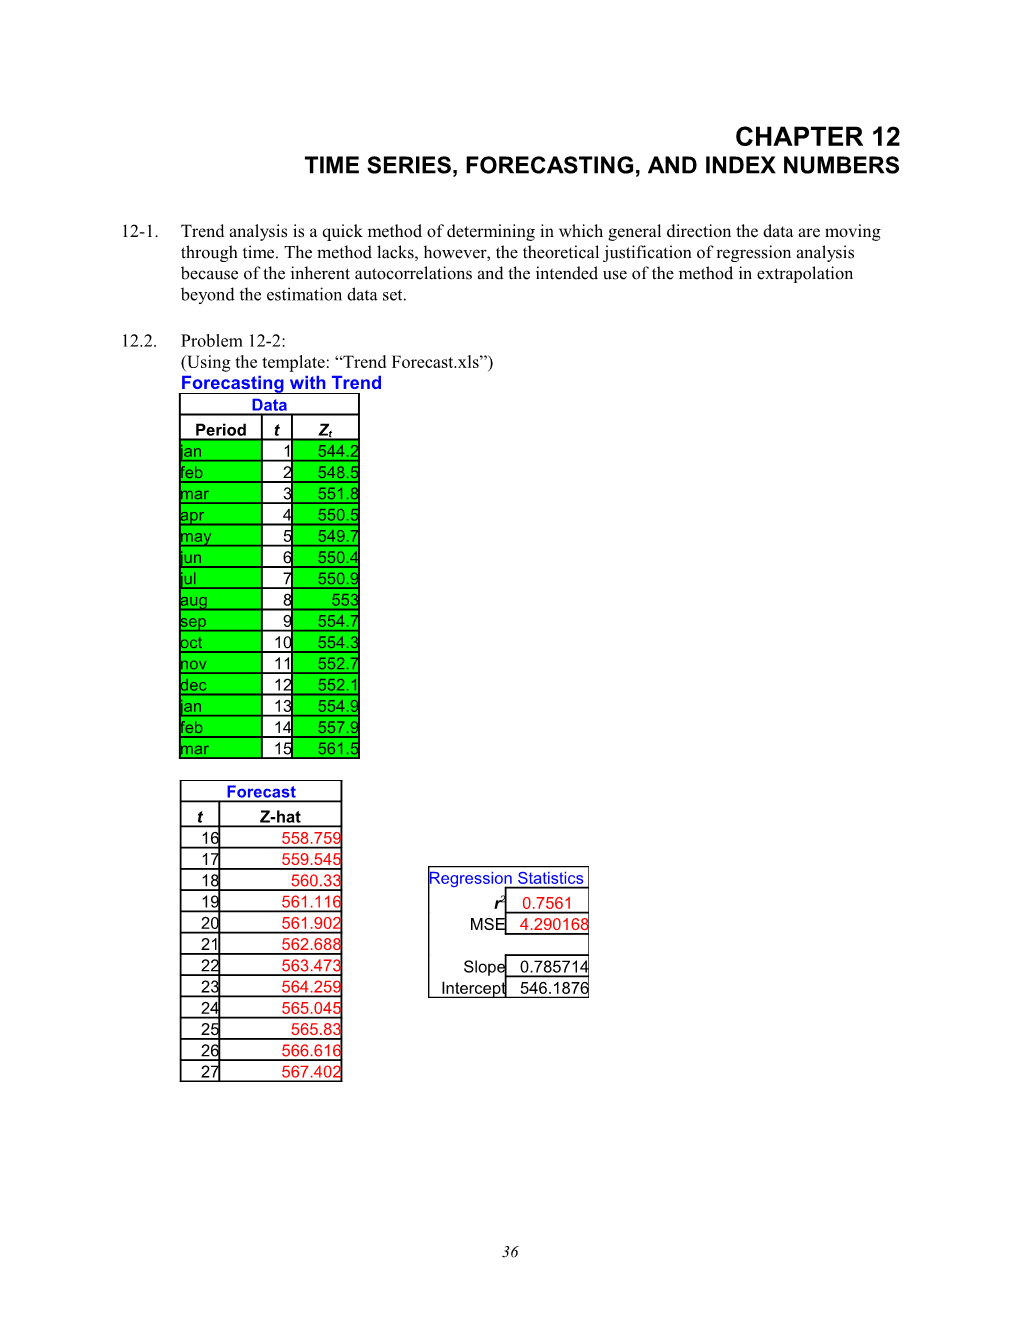 Time Series, Forecasting, and Index Numbers